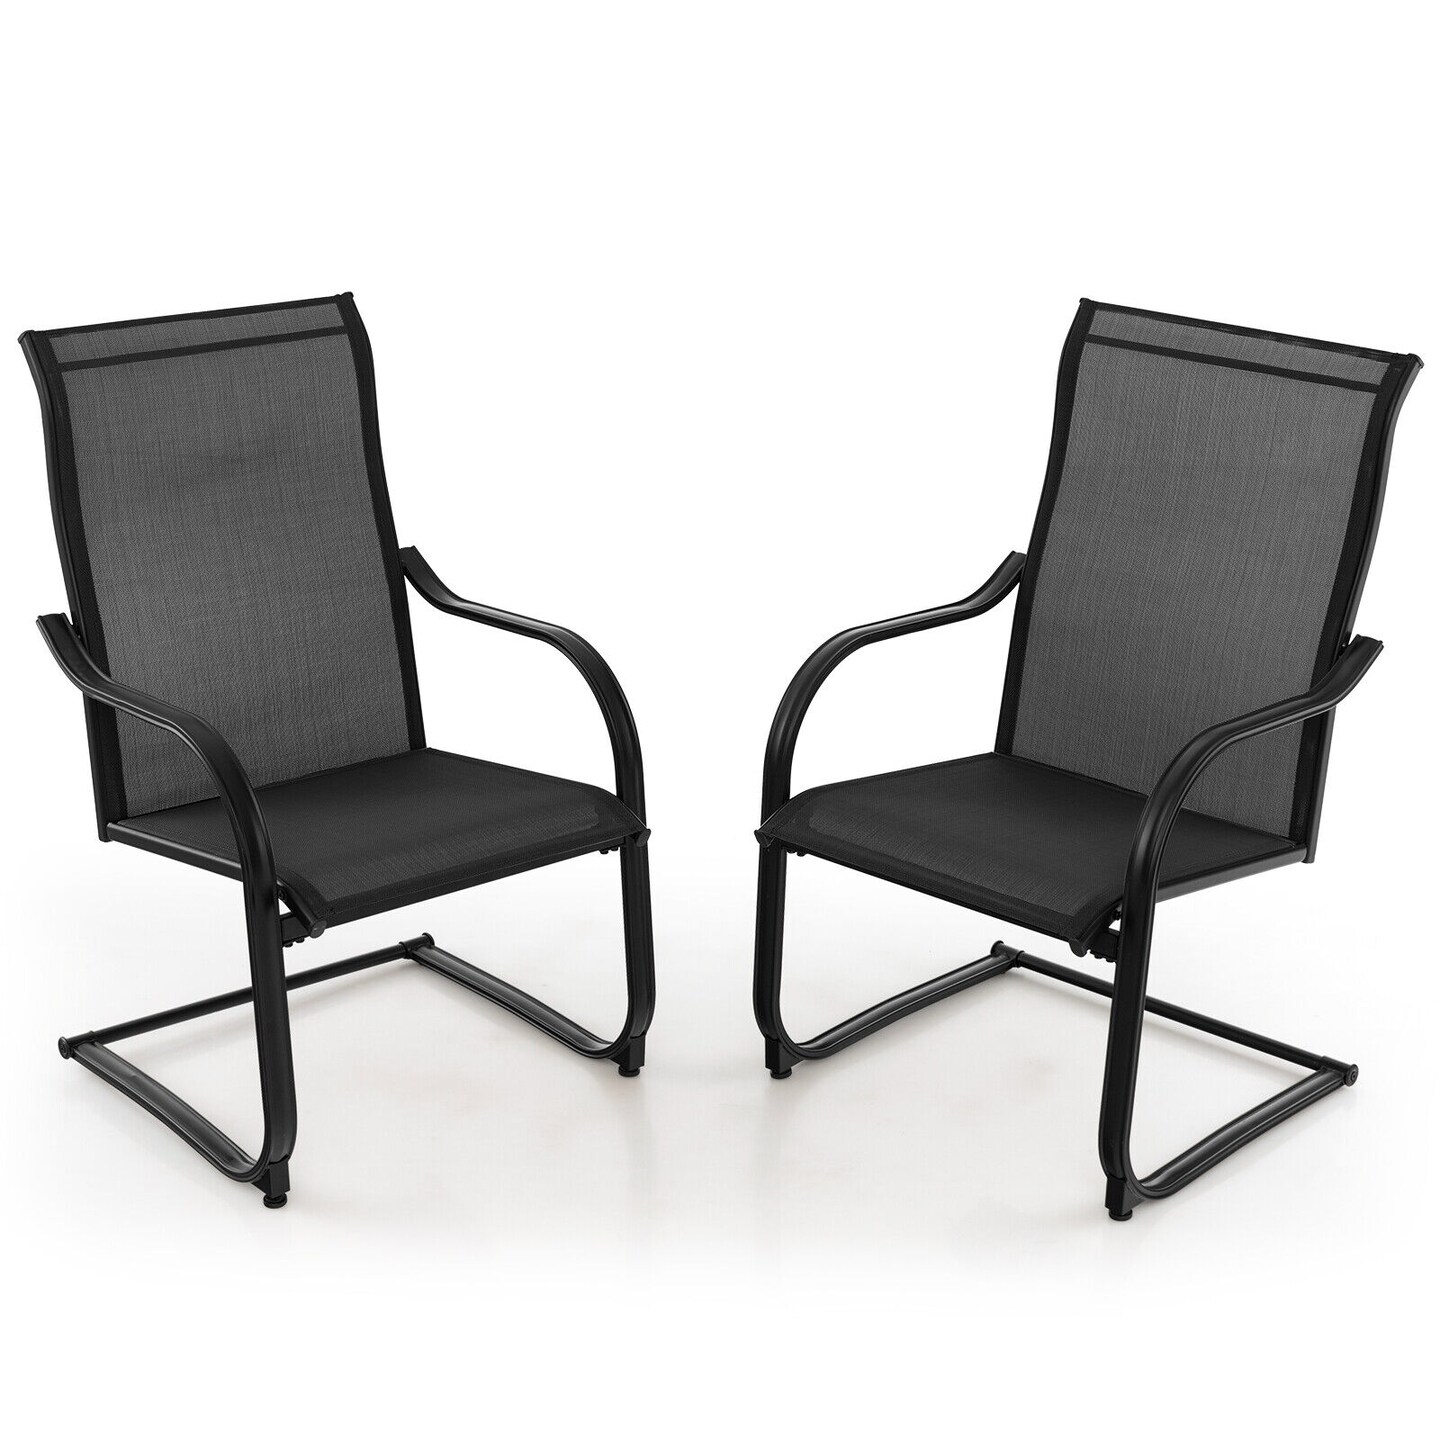 2 Pieces C-spring Motion Patio Dining Chairs With Breathable Fabric